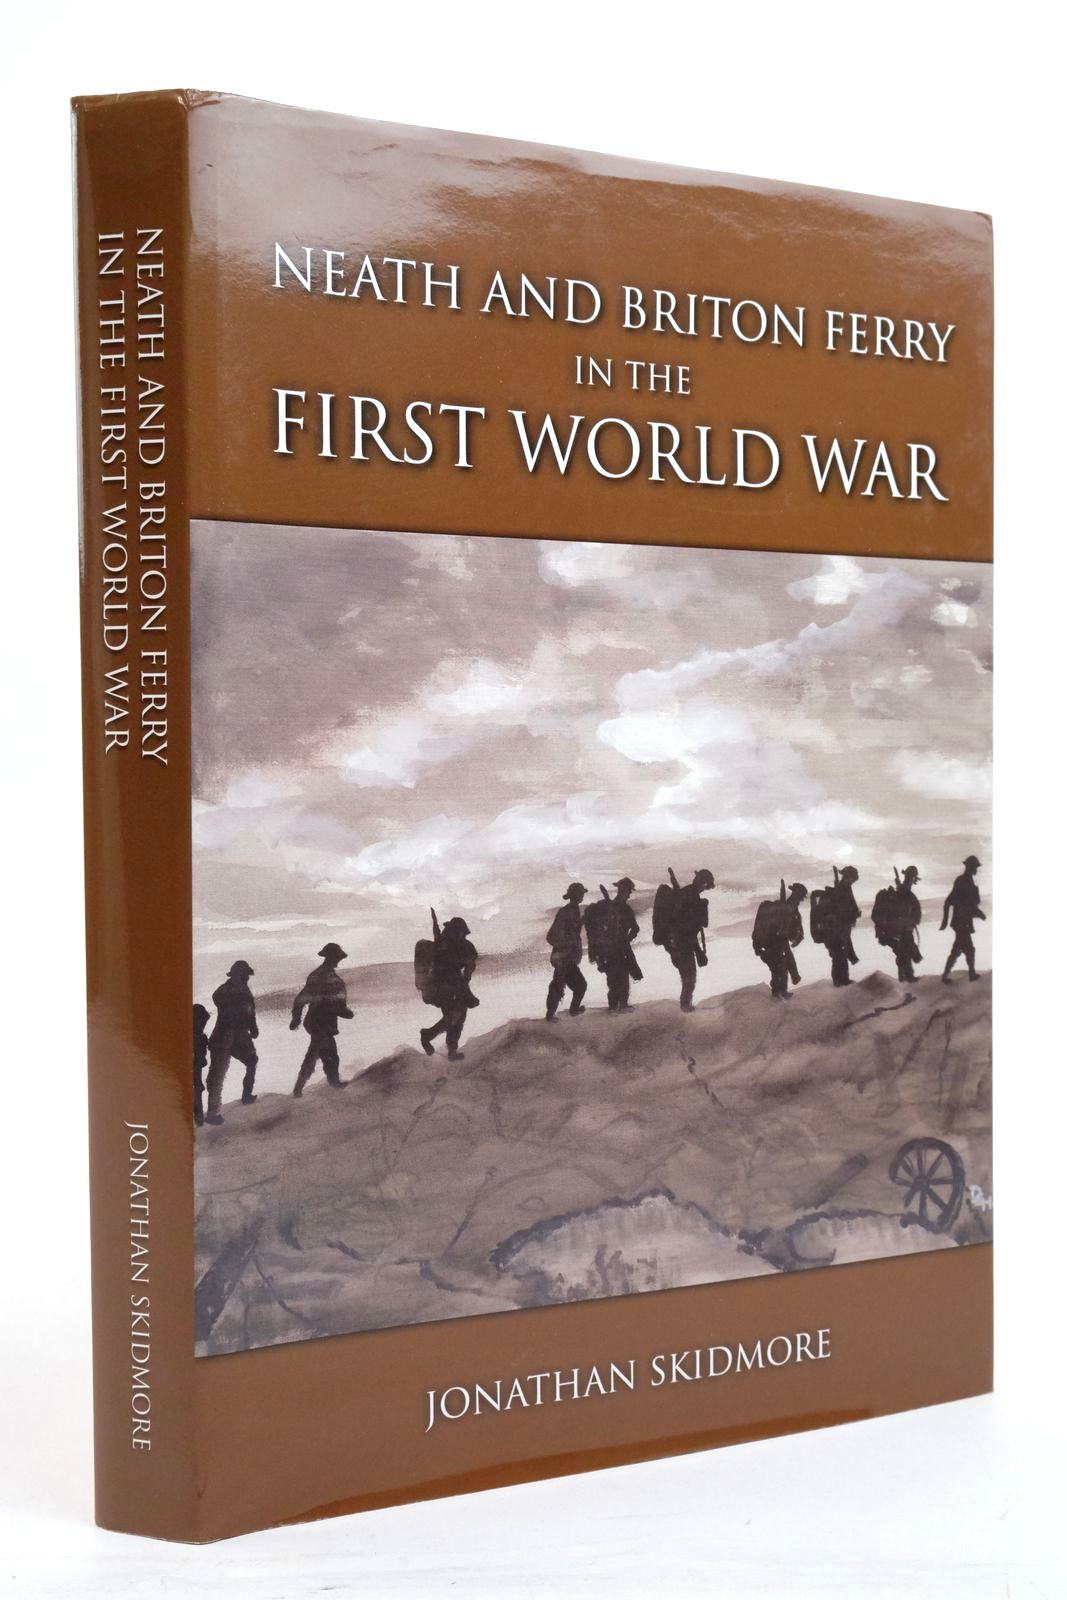 Photo of NEATH AND BRITON FERRY IN THE FIRST WORLD WAR written by Skidmore, Jonathan published by Johnathan Skidmore (STOCK CODE: 2138365)  for sale by Stella & Rose's Books